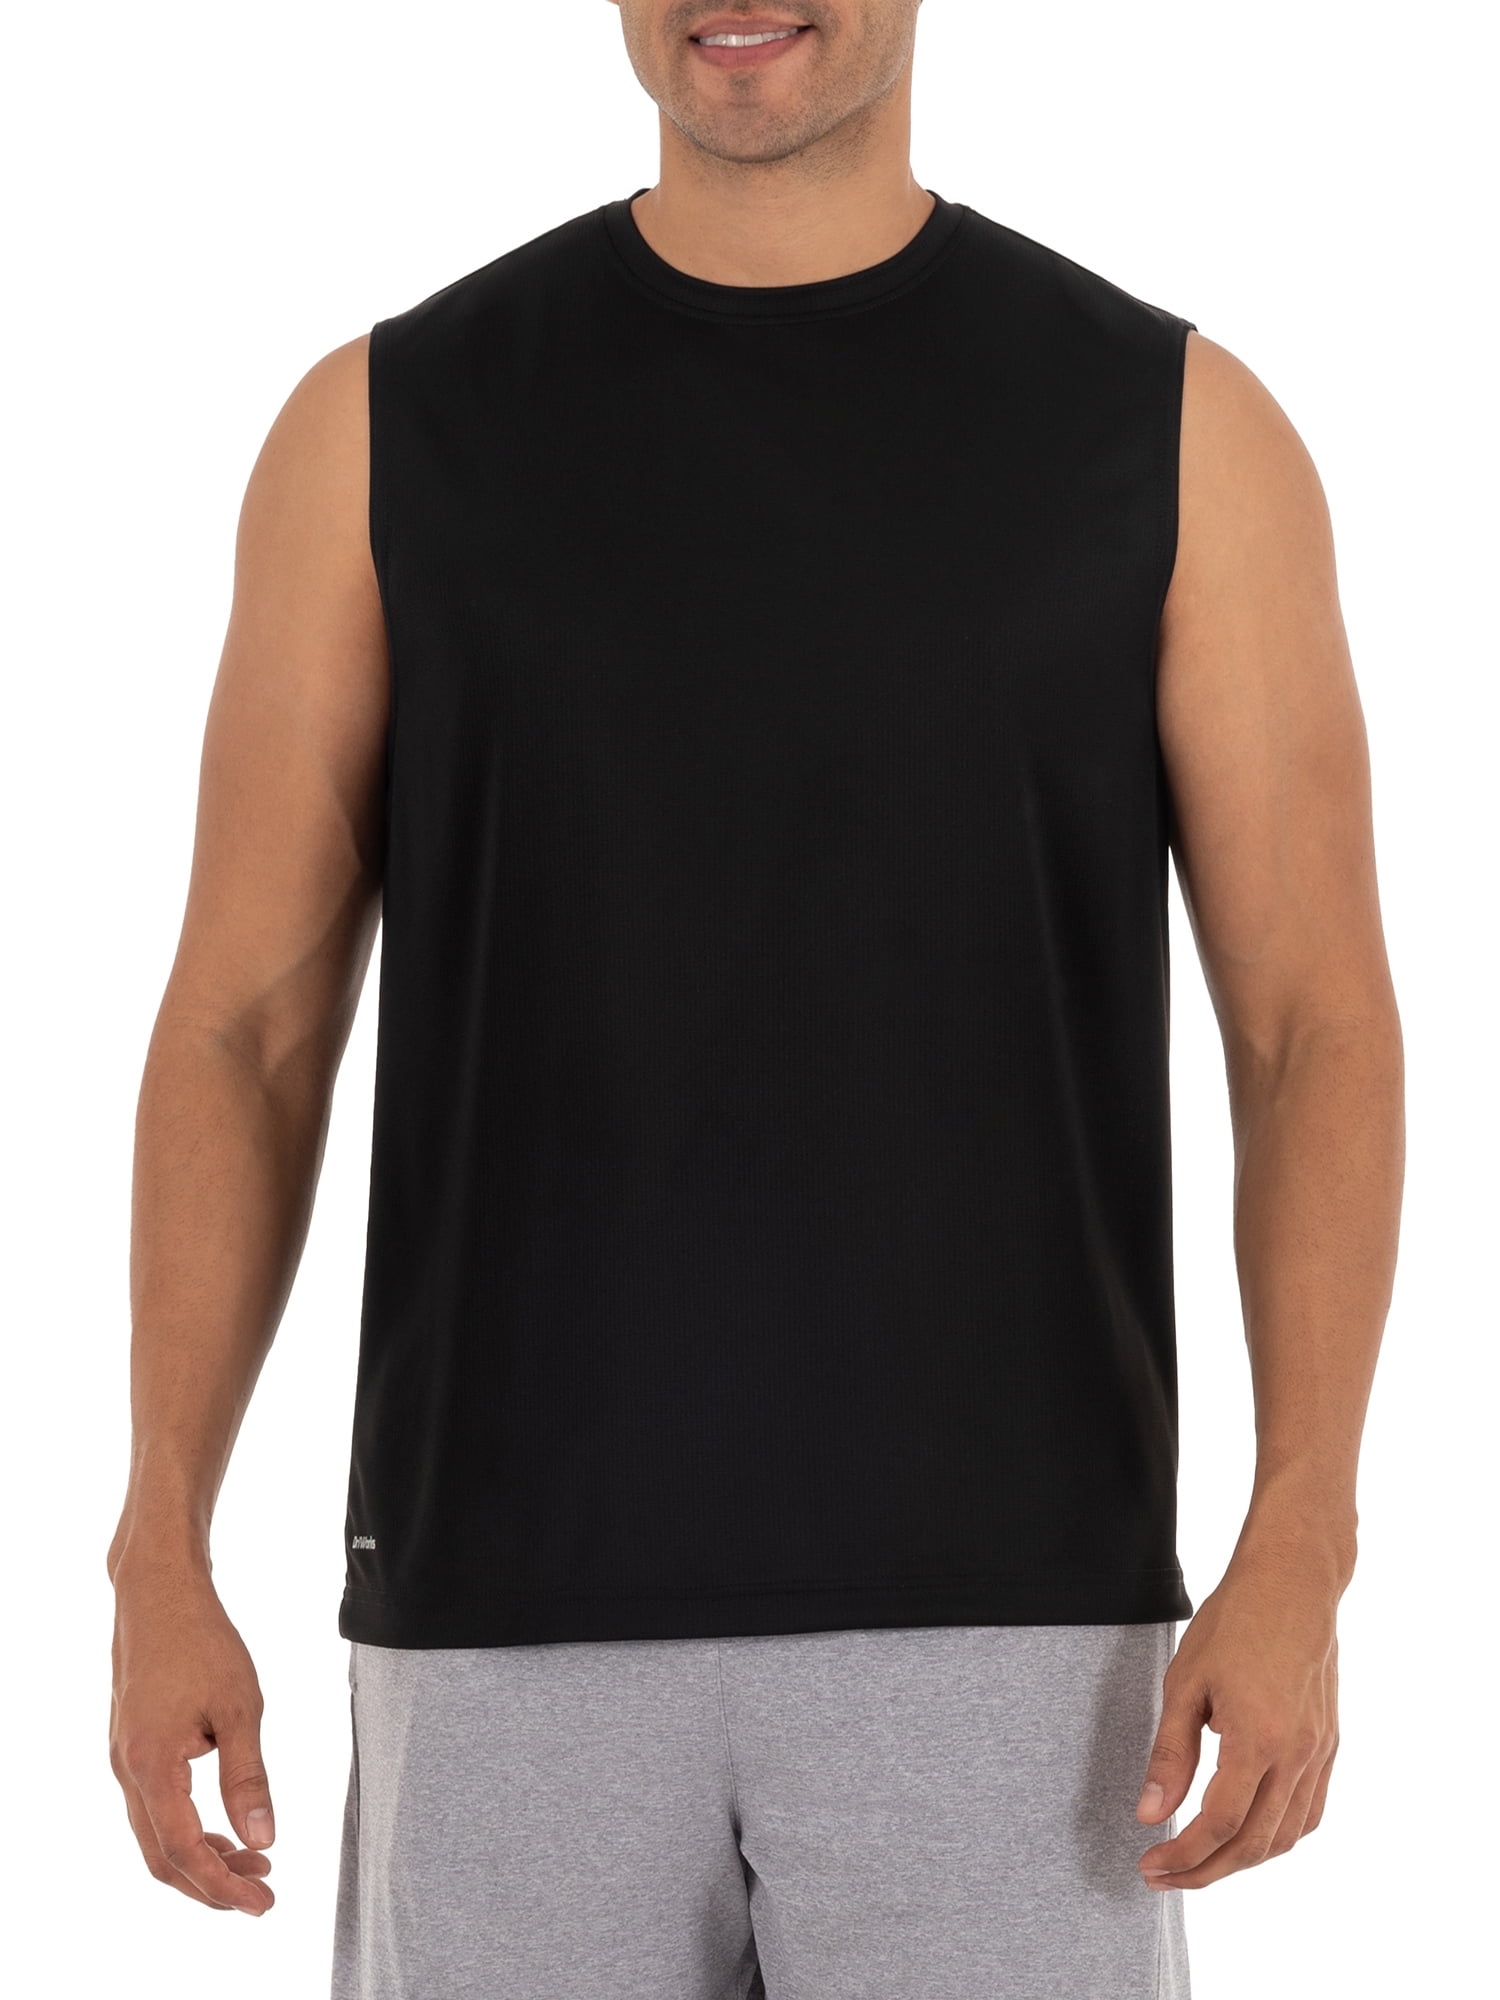 Athletic Works Men's and Big Men's Quick Dry Muscle Tee, up to 5XL ...